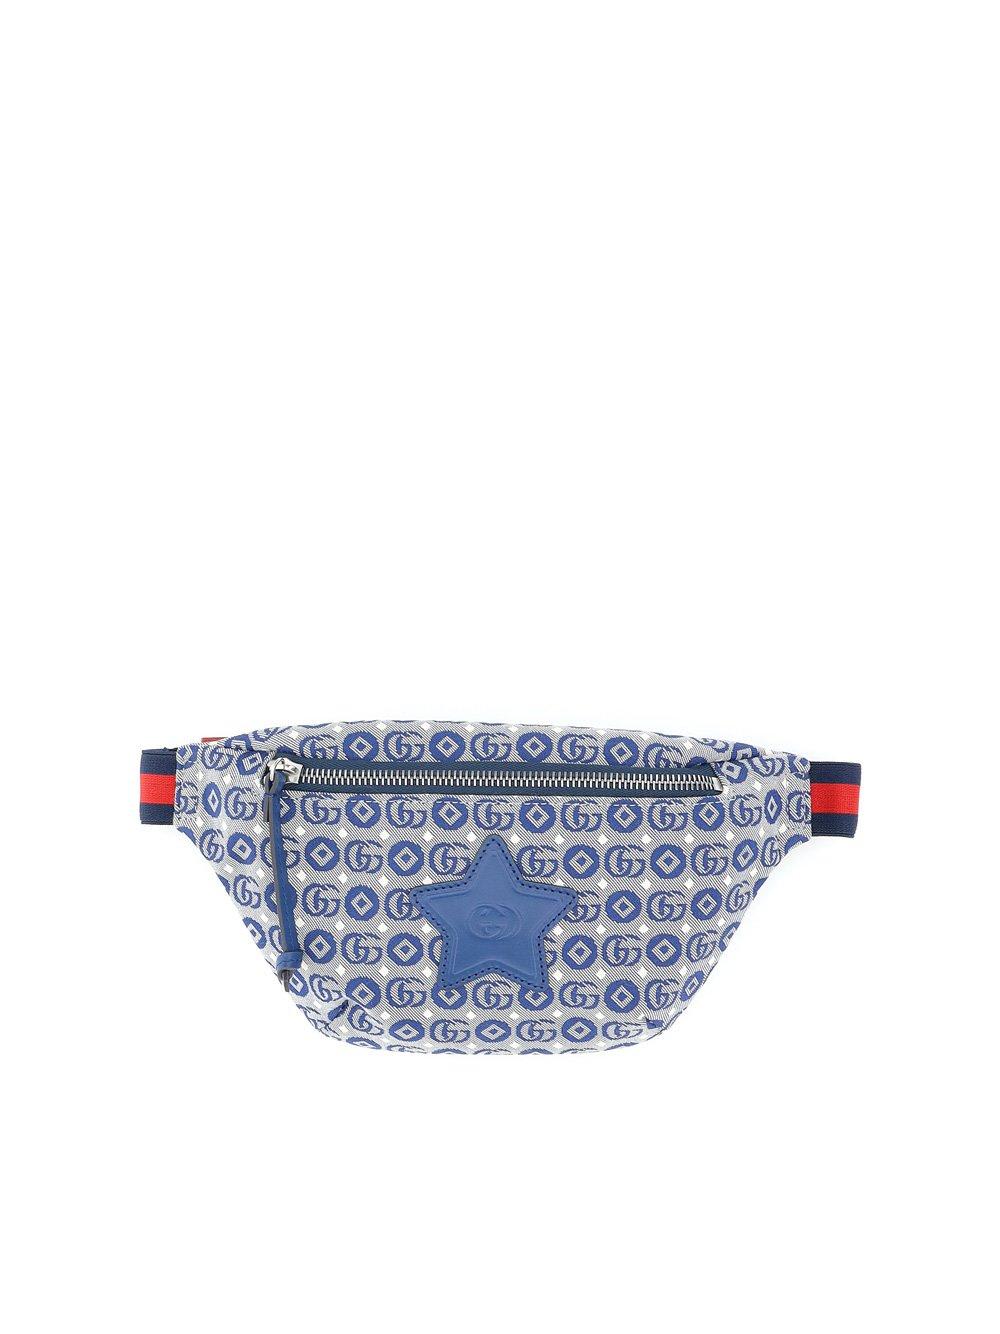 Gucci All-over Patterned Zipped Belt Bag